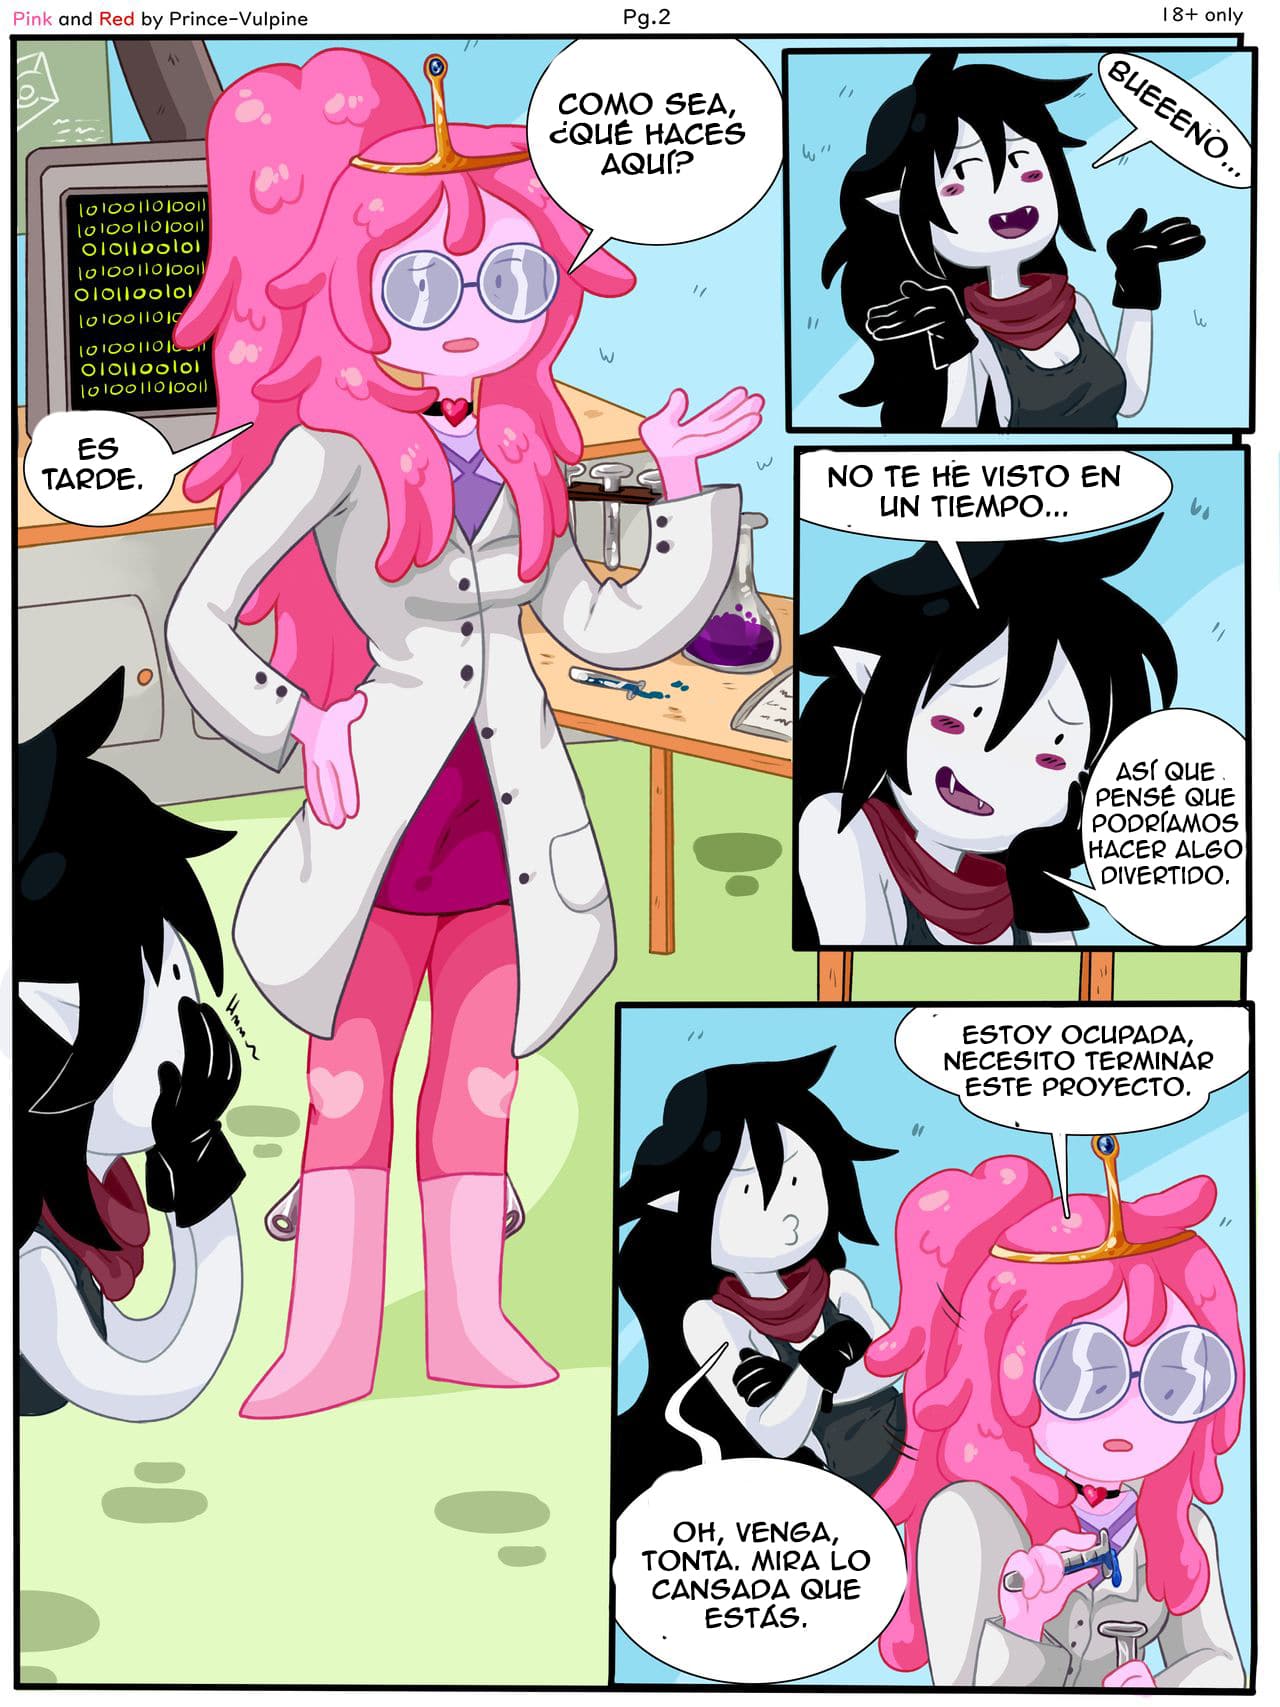 Pink and Red – Bubbline Comic - 4bb6a90a70a0bcea9fb1c2fc63df6e31